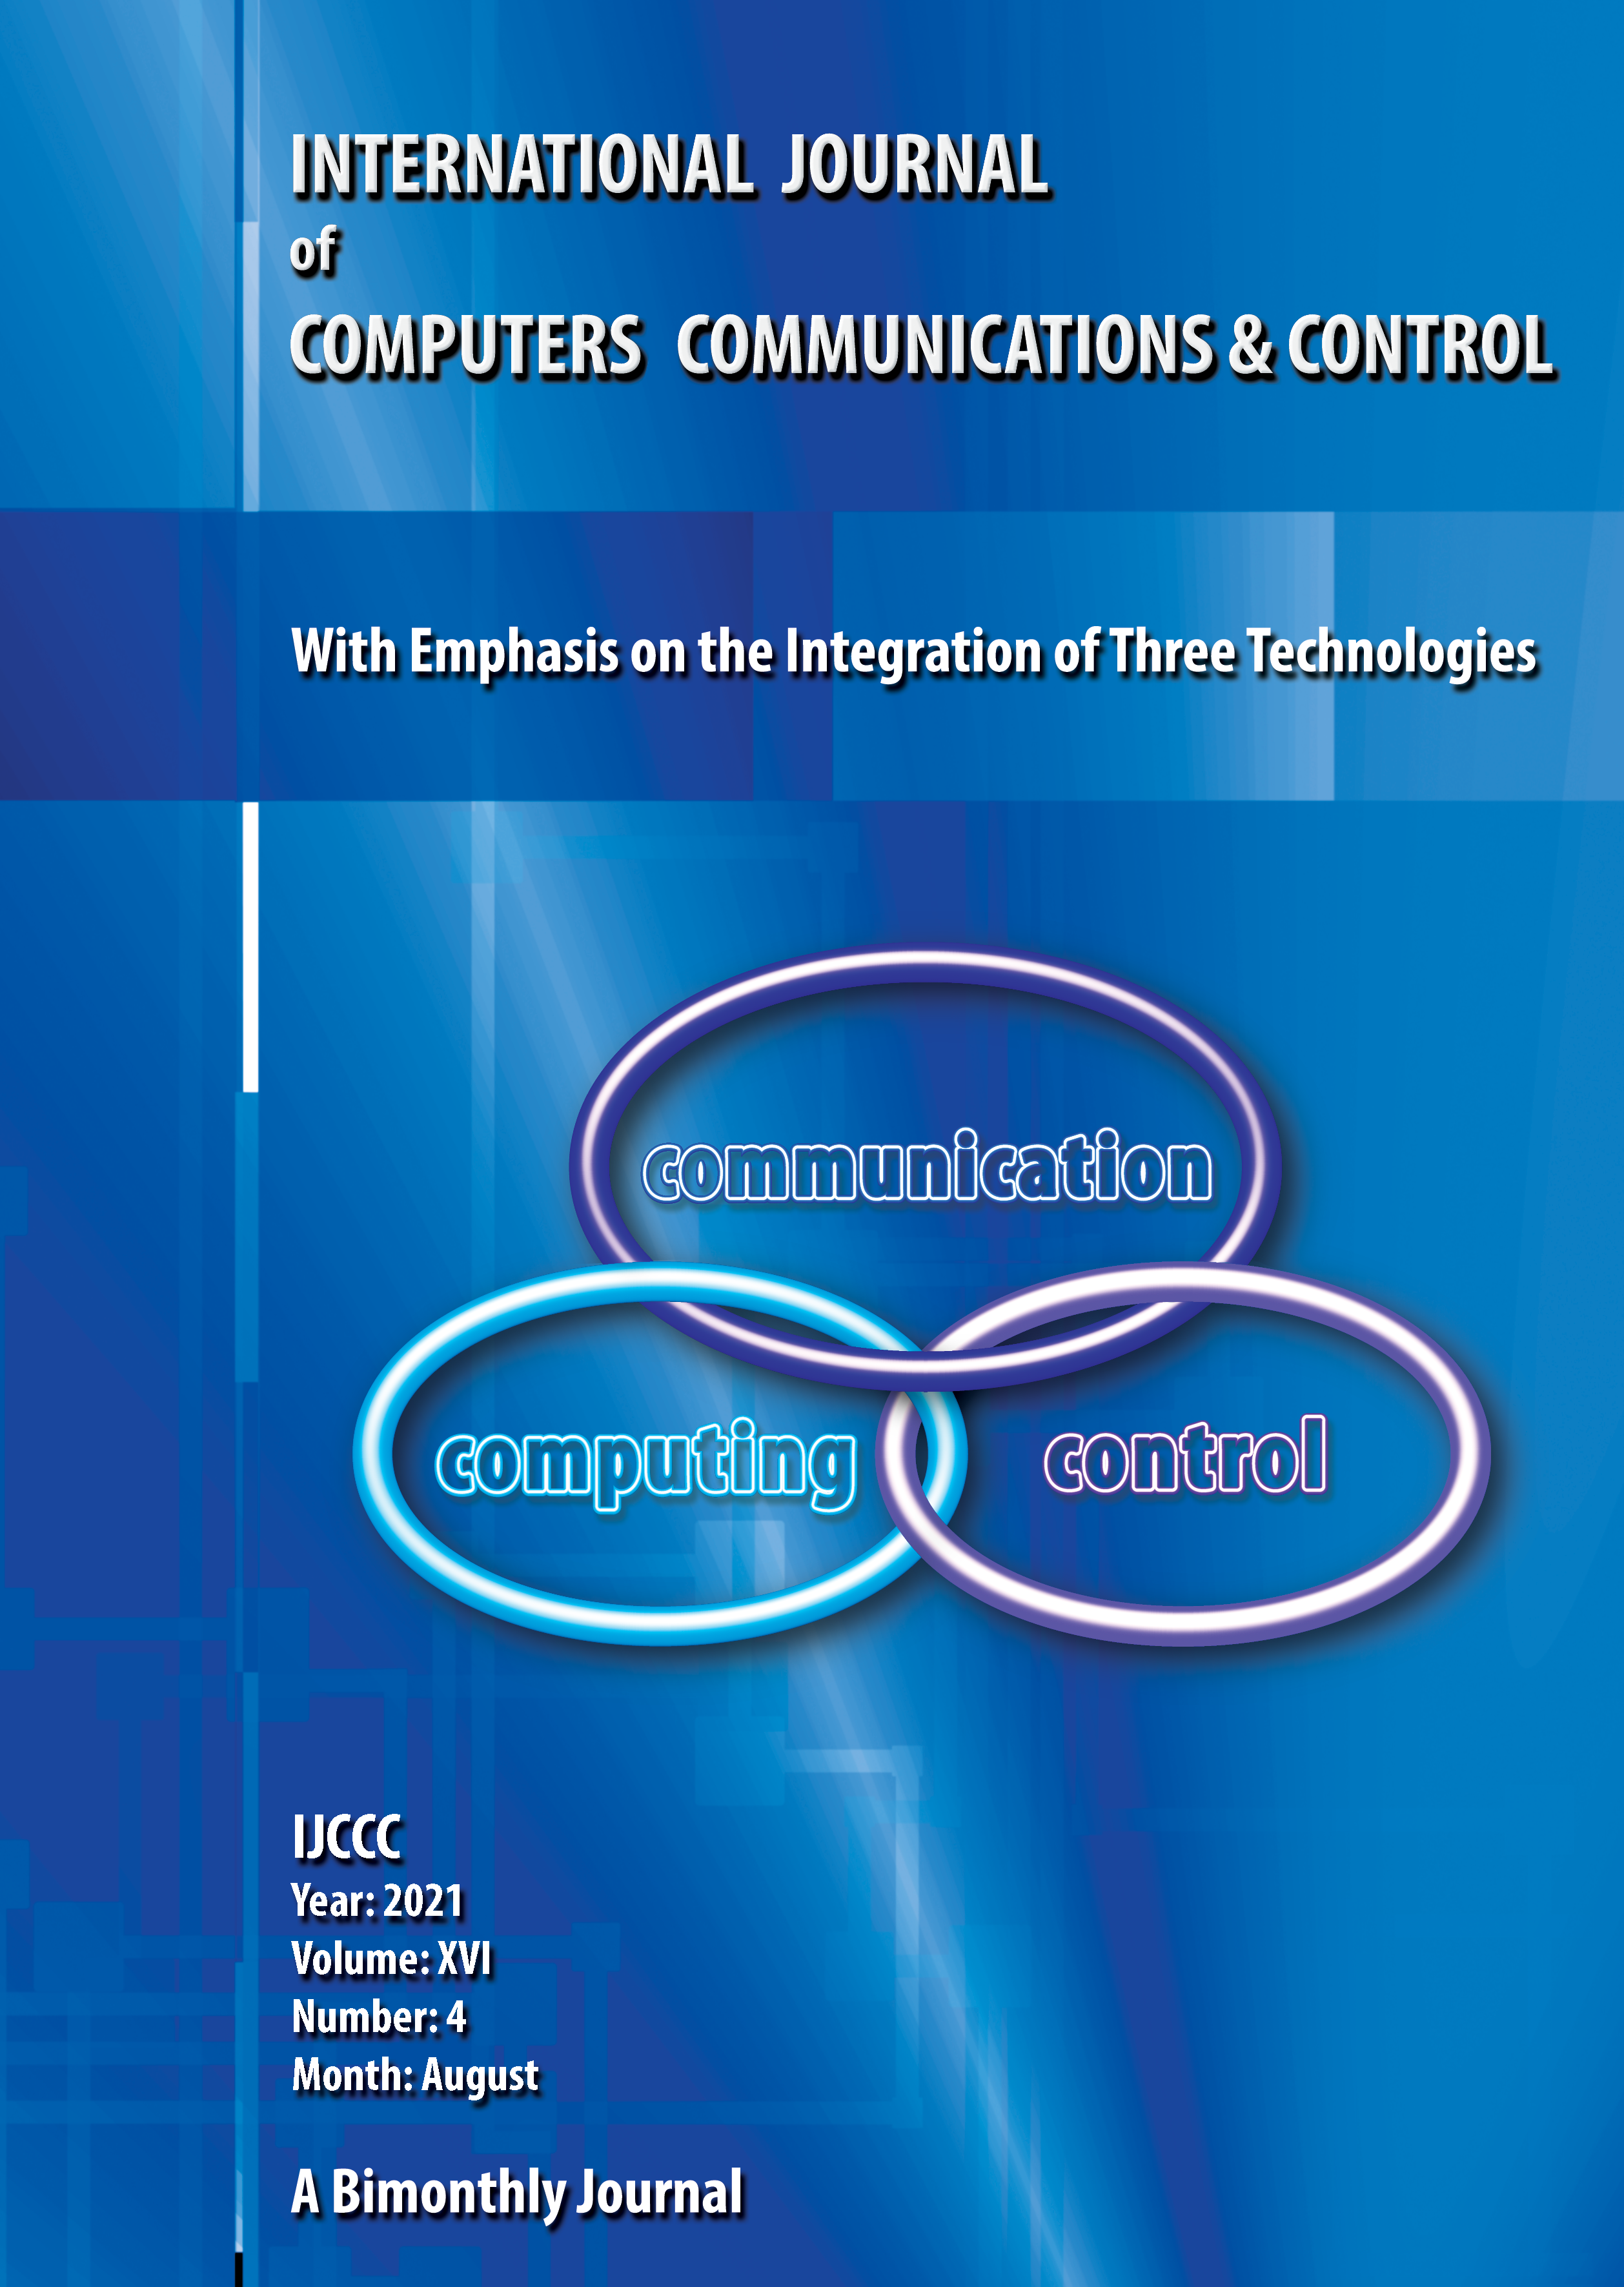 					View Vol. 16 No. 4 (2021): International Journal of Computers Communications & Control (August)
				